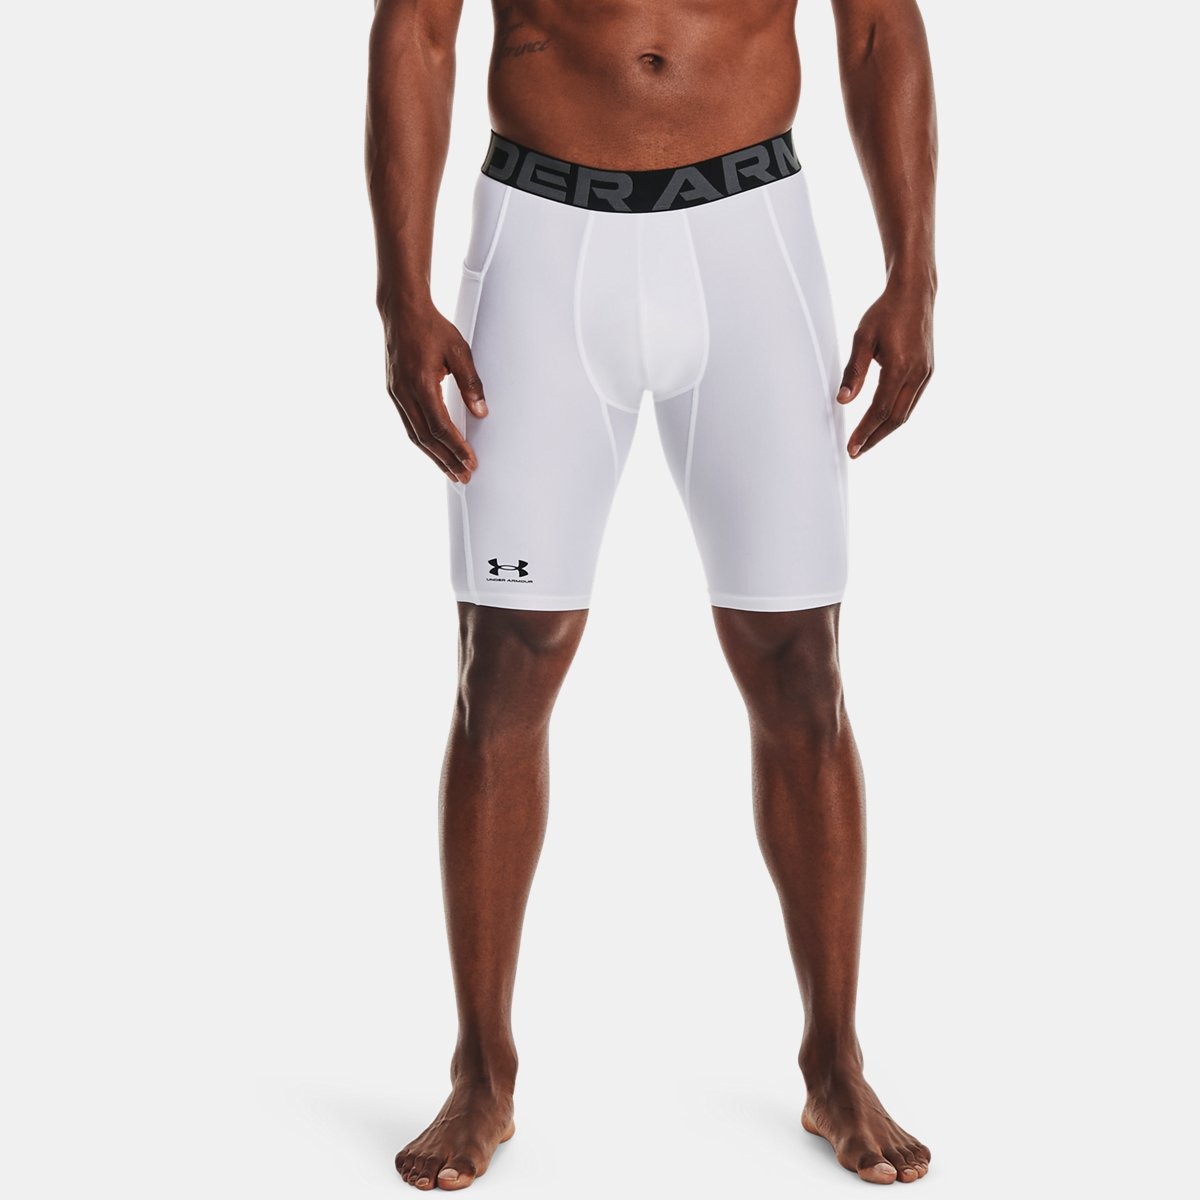 White Shorts for Man at Under Armour GOOFASH